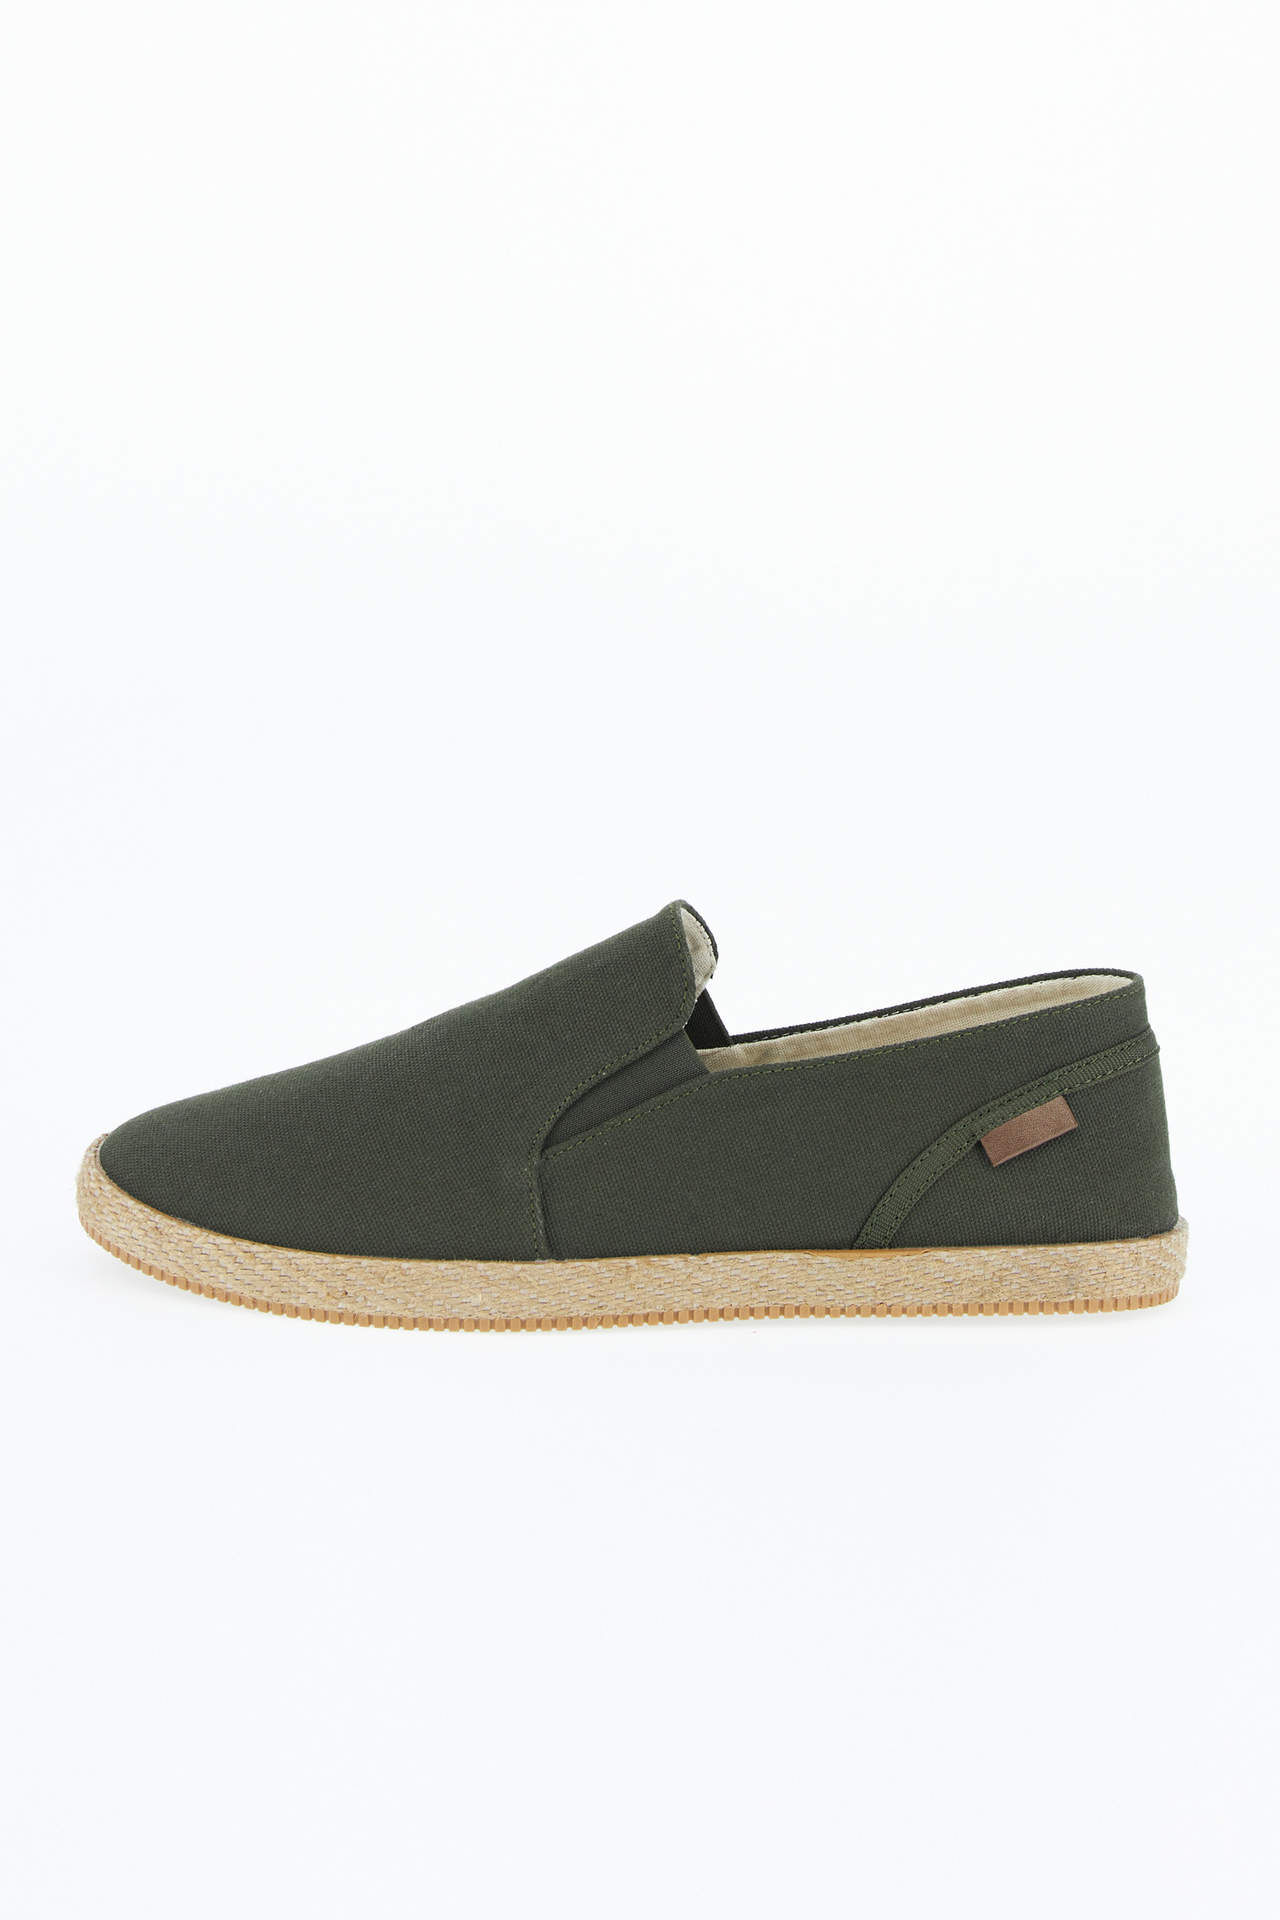 DEFACTO Man Flat Sole Casual Shoes